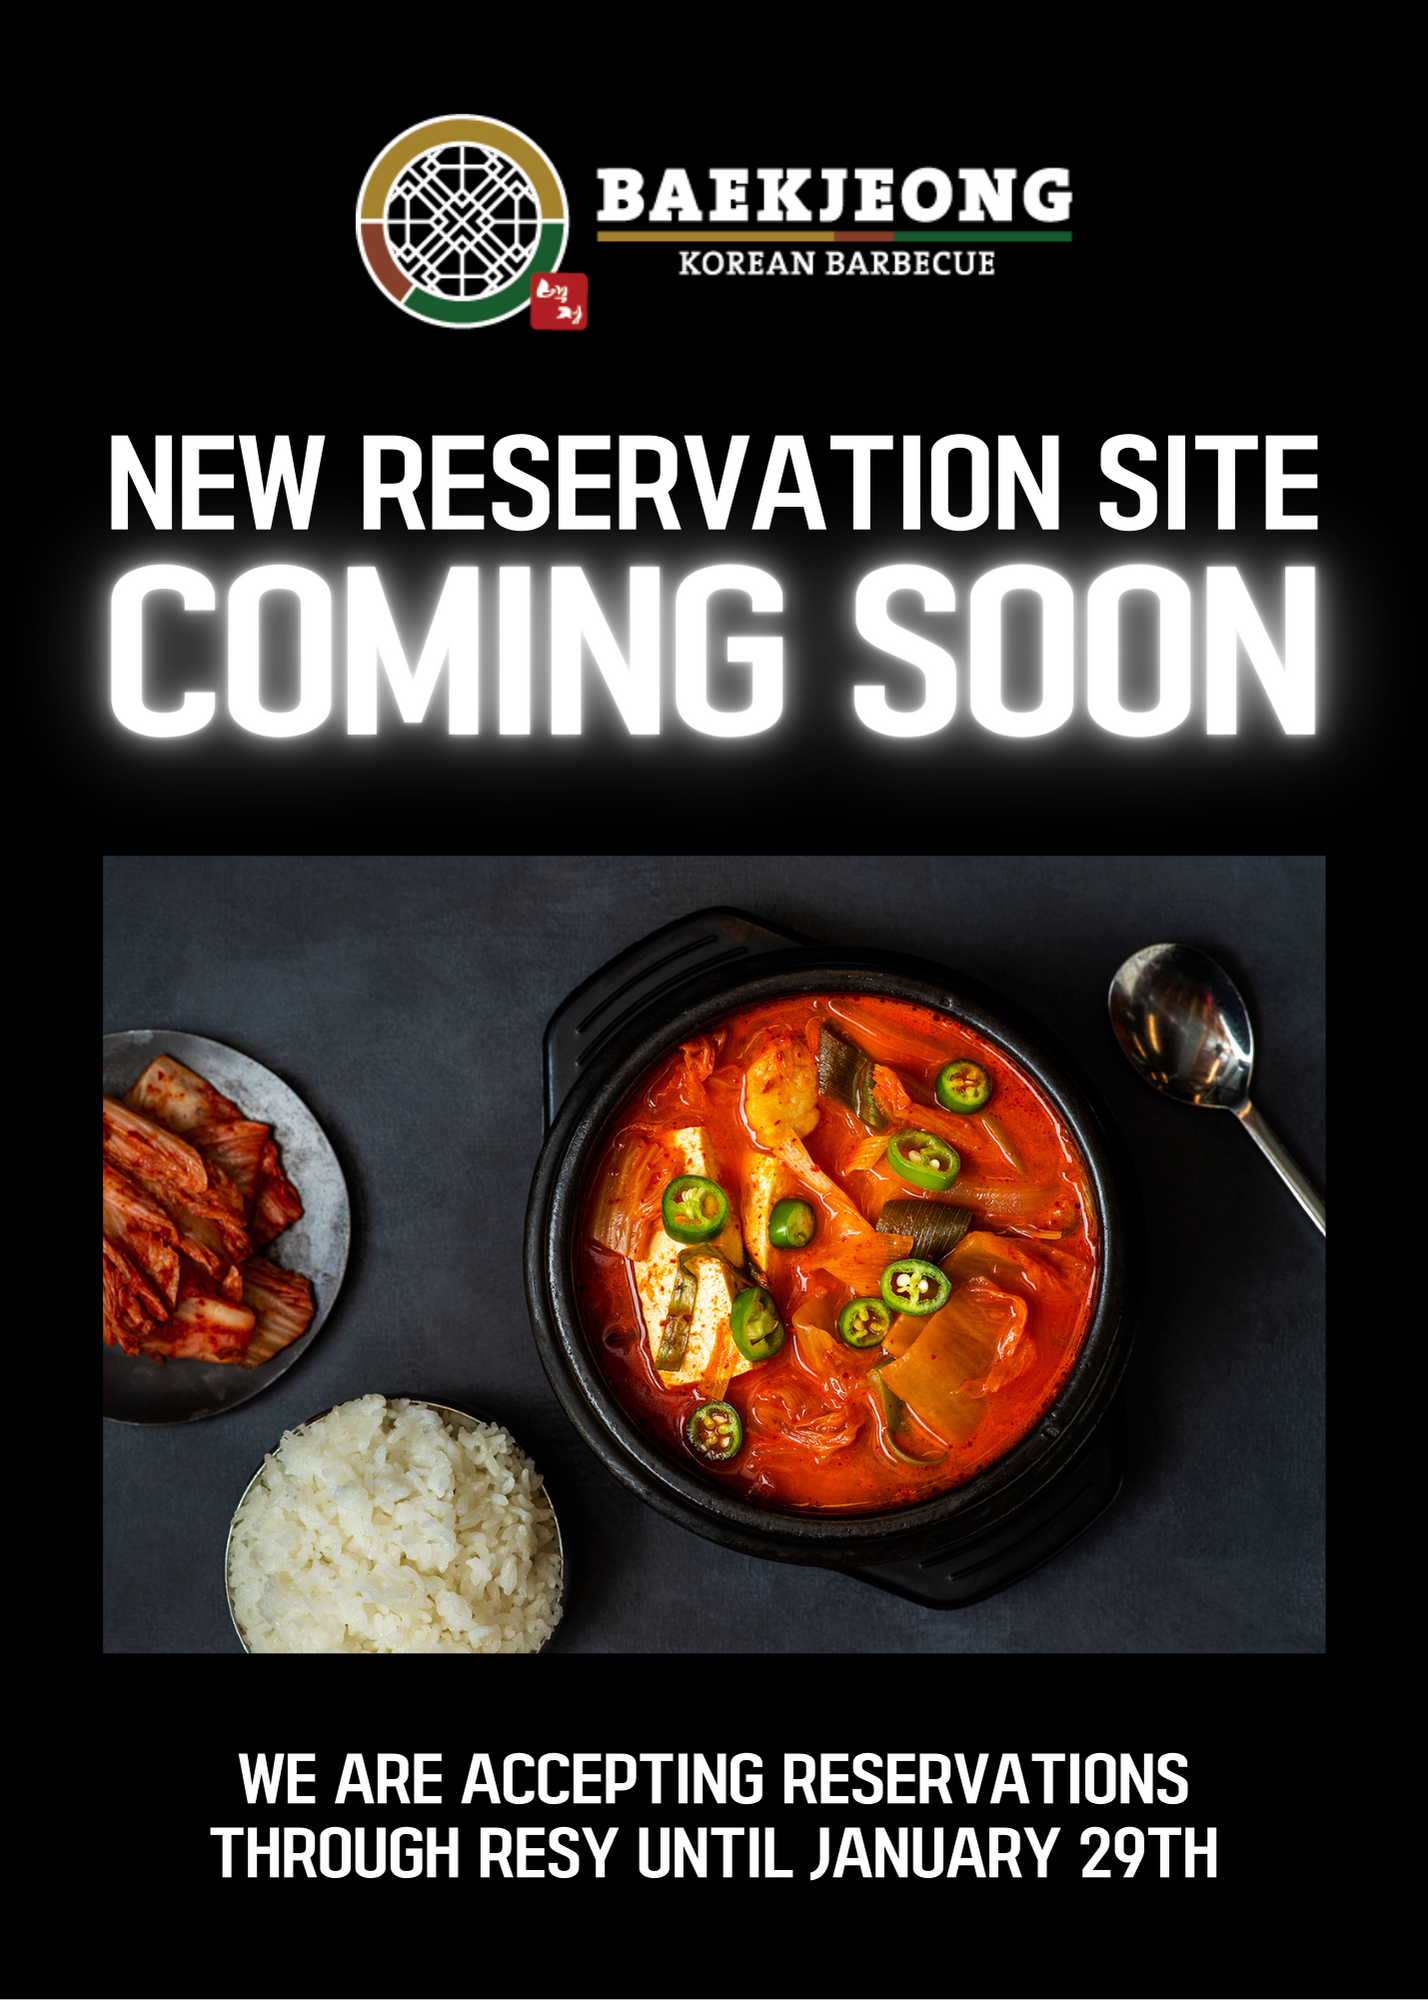 New reservation site coming soon - we are accepting reservations through Resy until February 1st